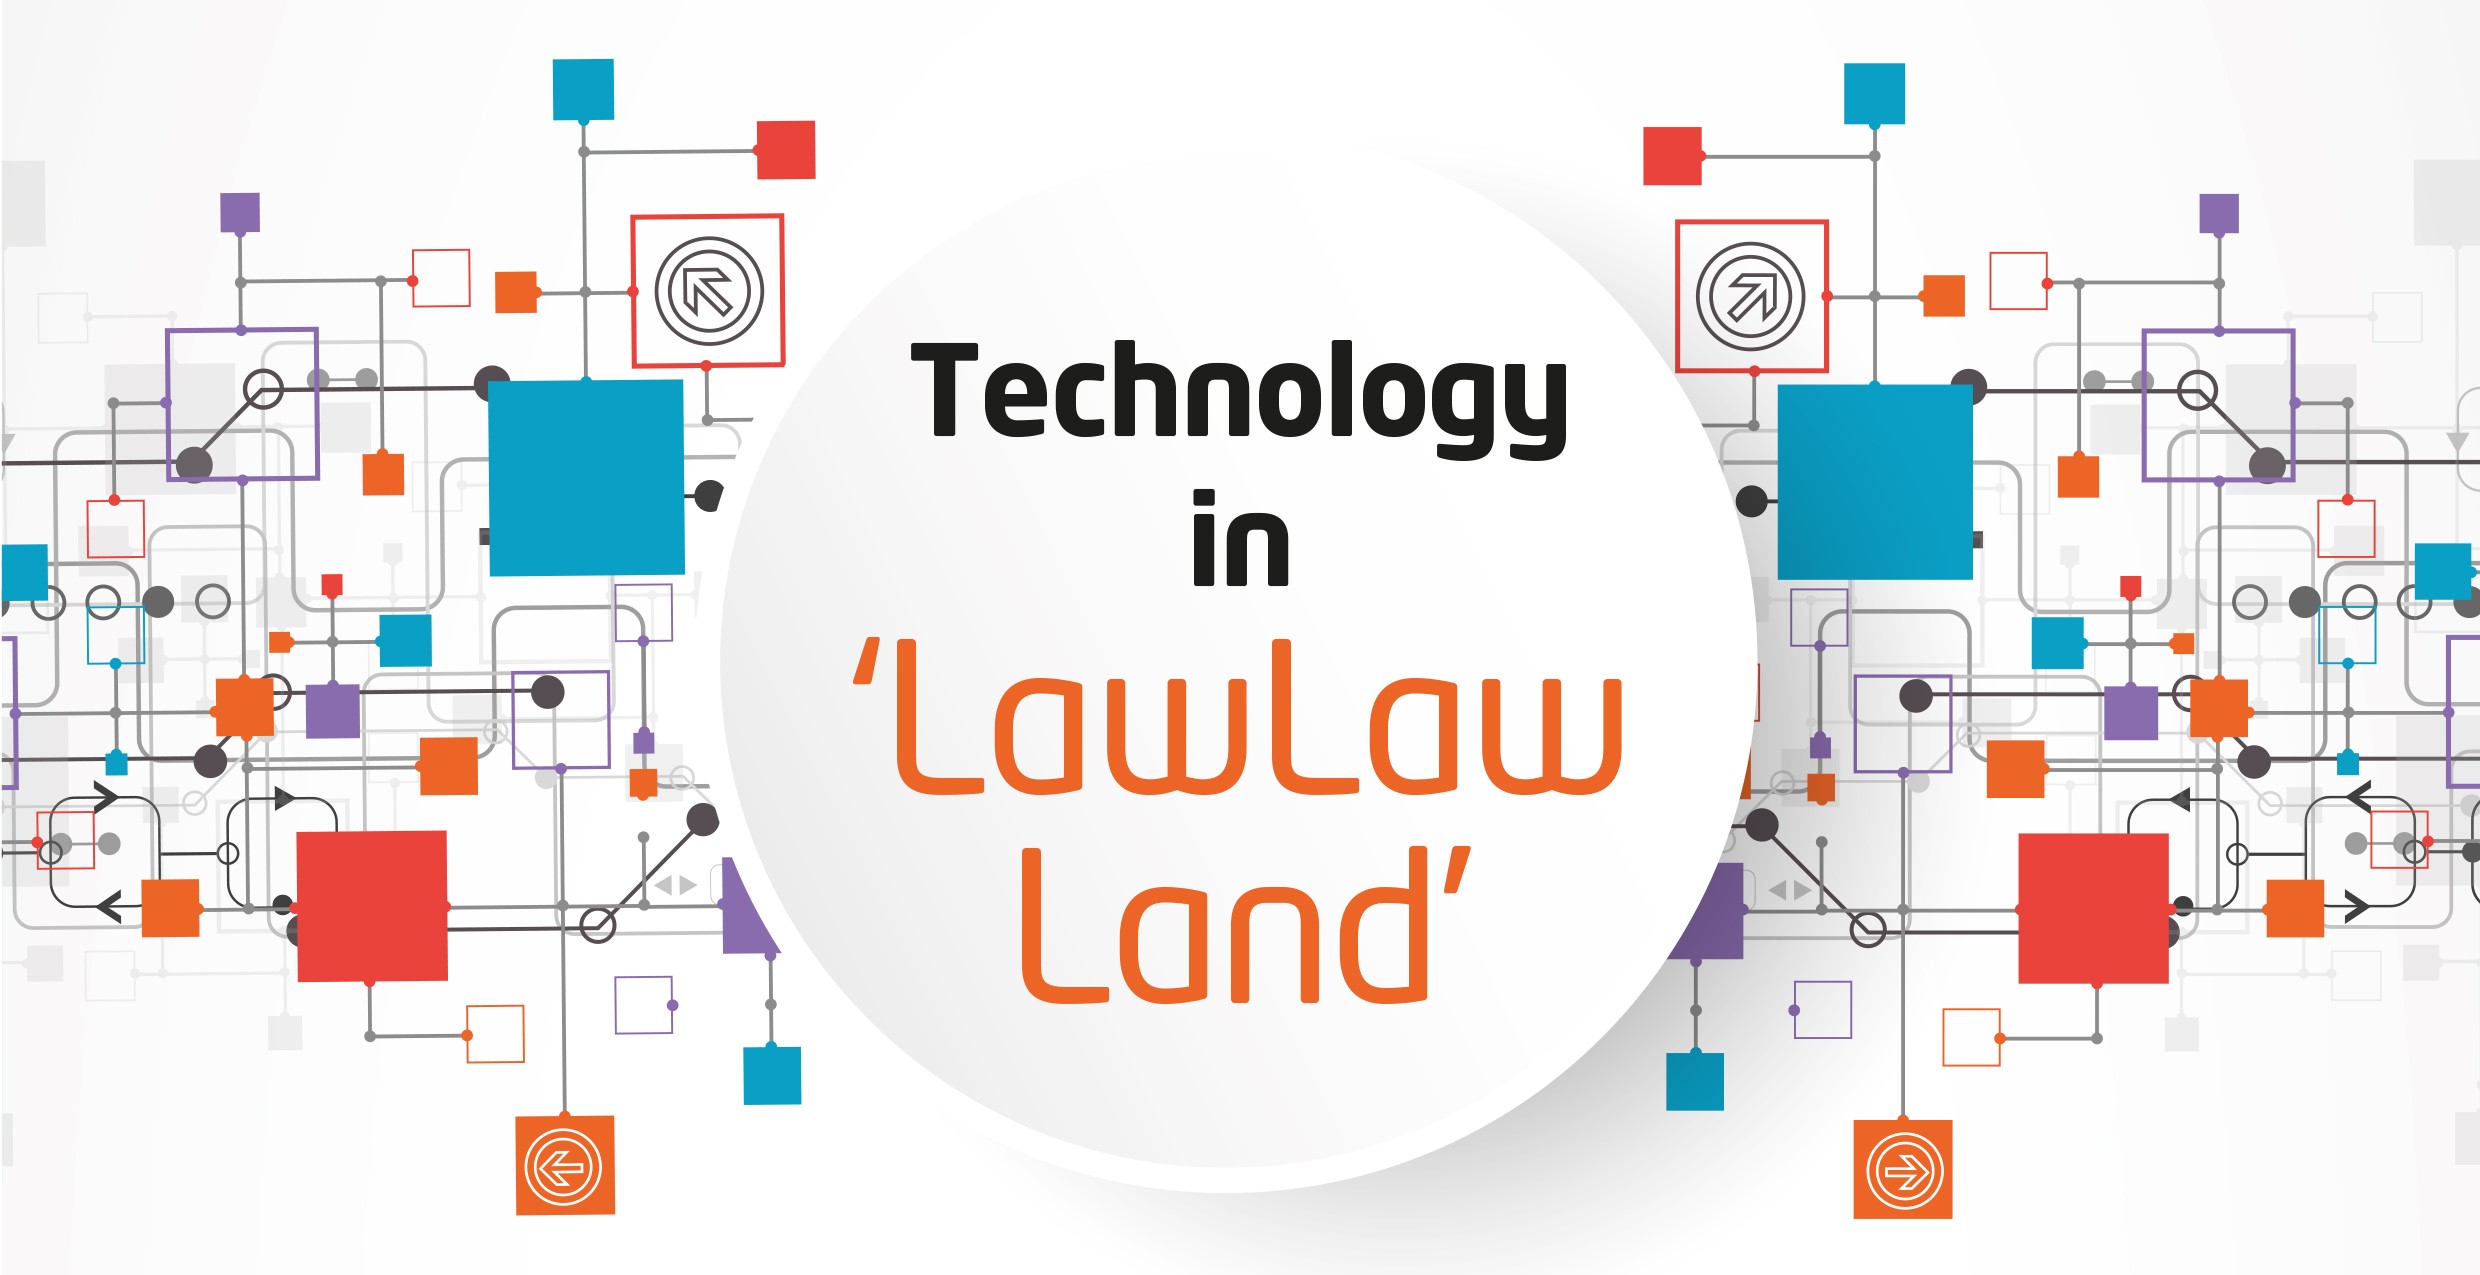 Technology in ‘Law Law Land’